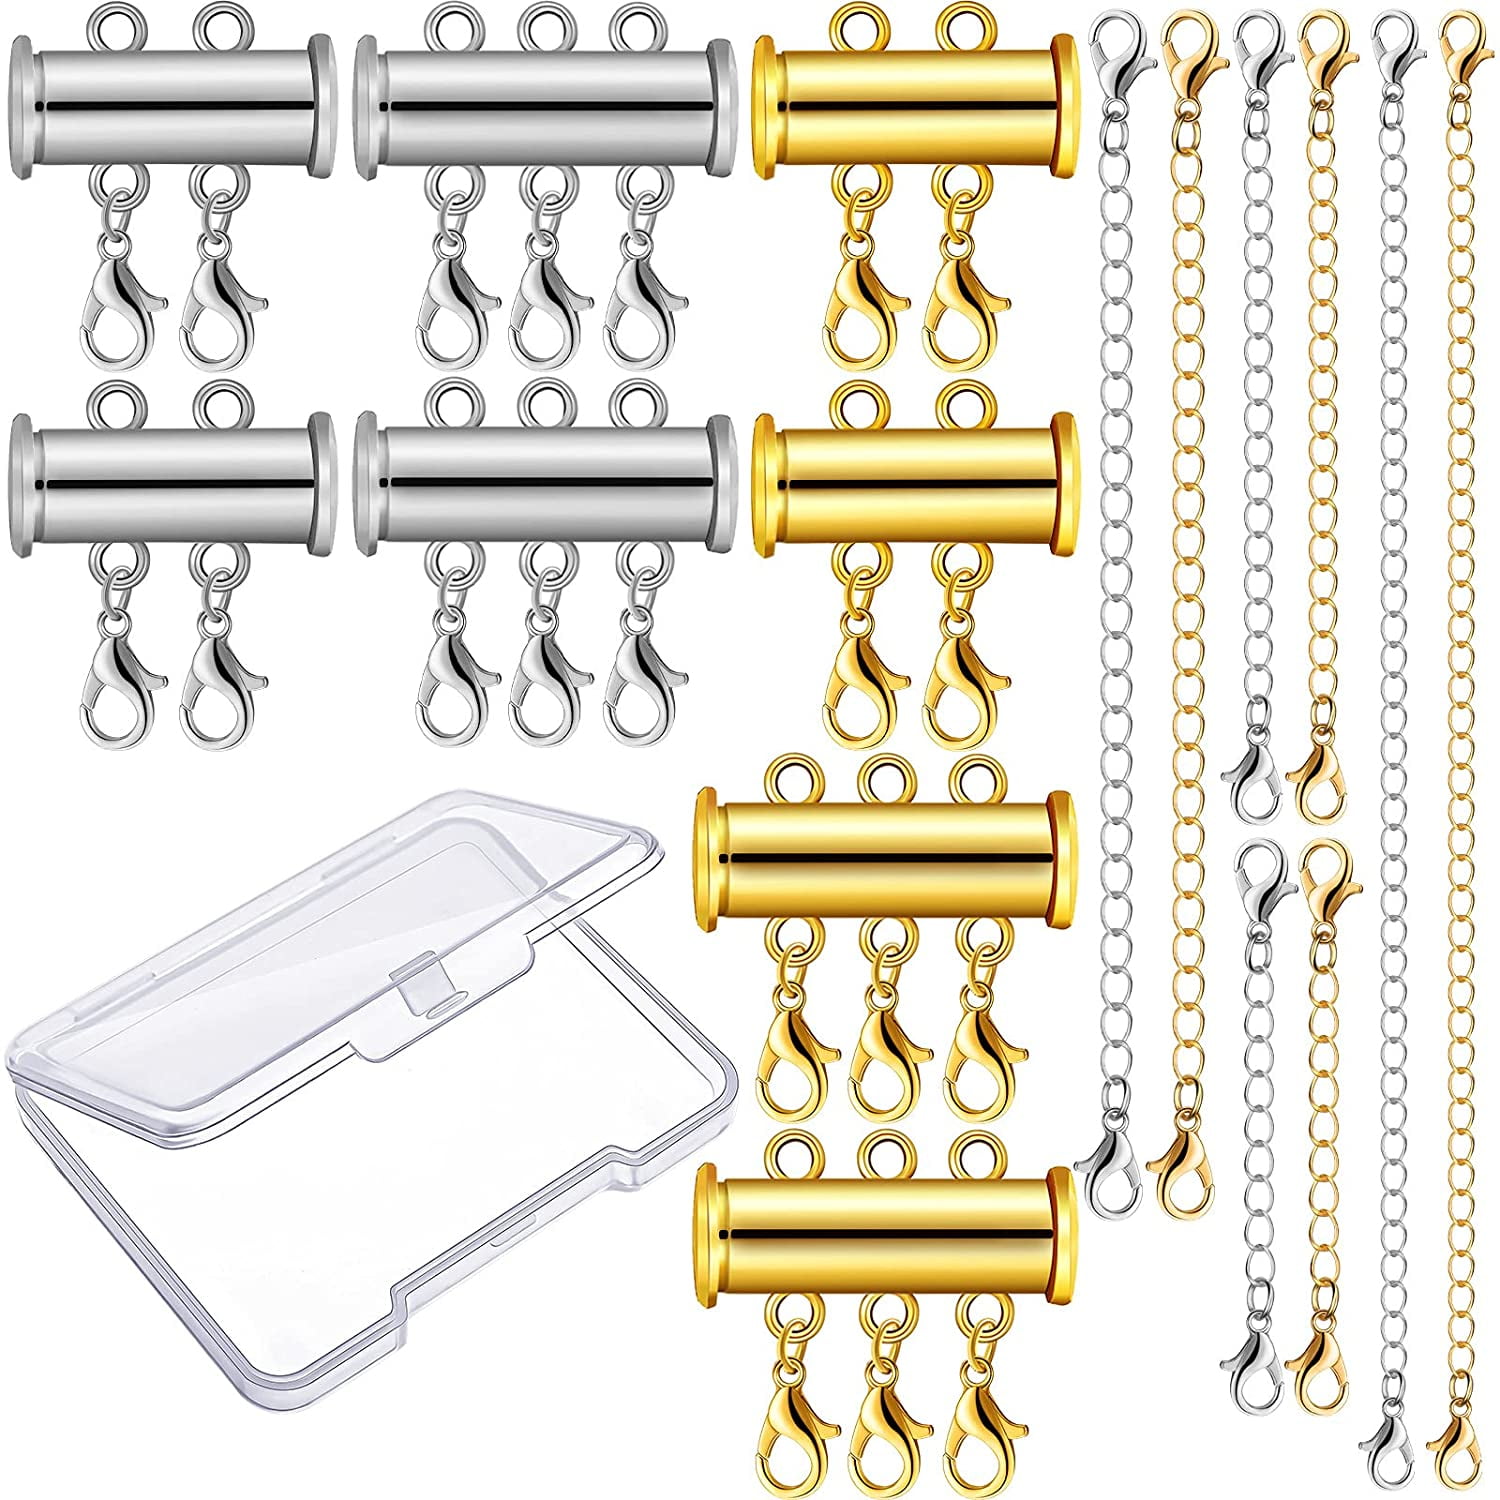  YMCAFZ Layered Necklace Spacer Clasp, 3 Strands Necklaces Slide  Magnetic Tube Lock with Lobster Clasps, Jewelry Clasps Connectors for  Layered Bracelet Jewelry Crafts Necklace, 2 Pack Gold and Sliver : Arts